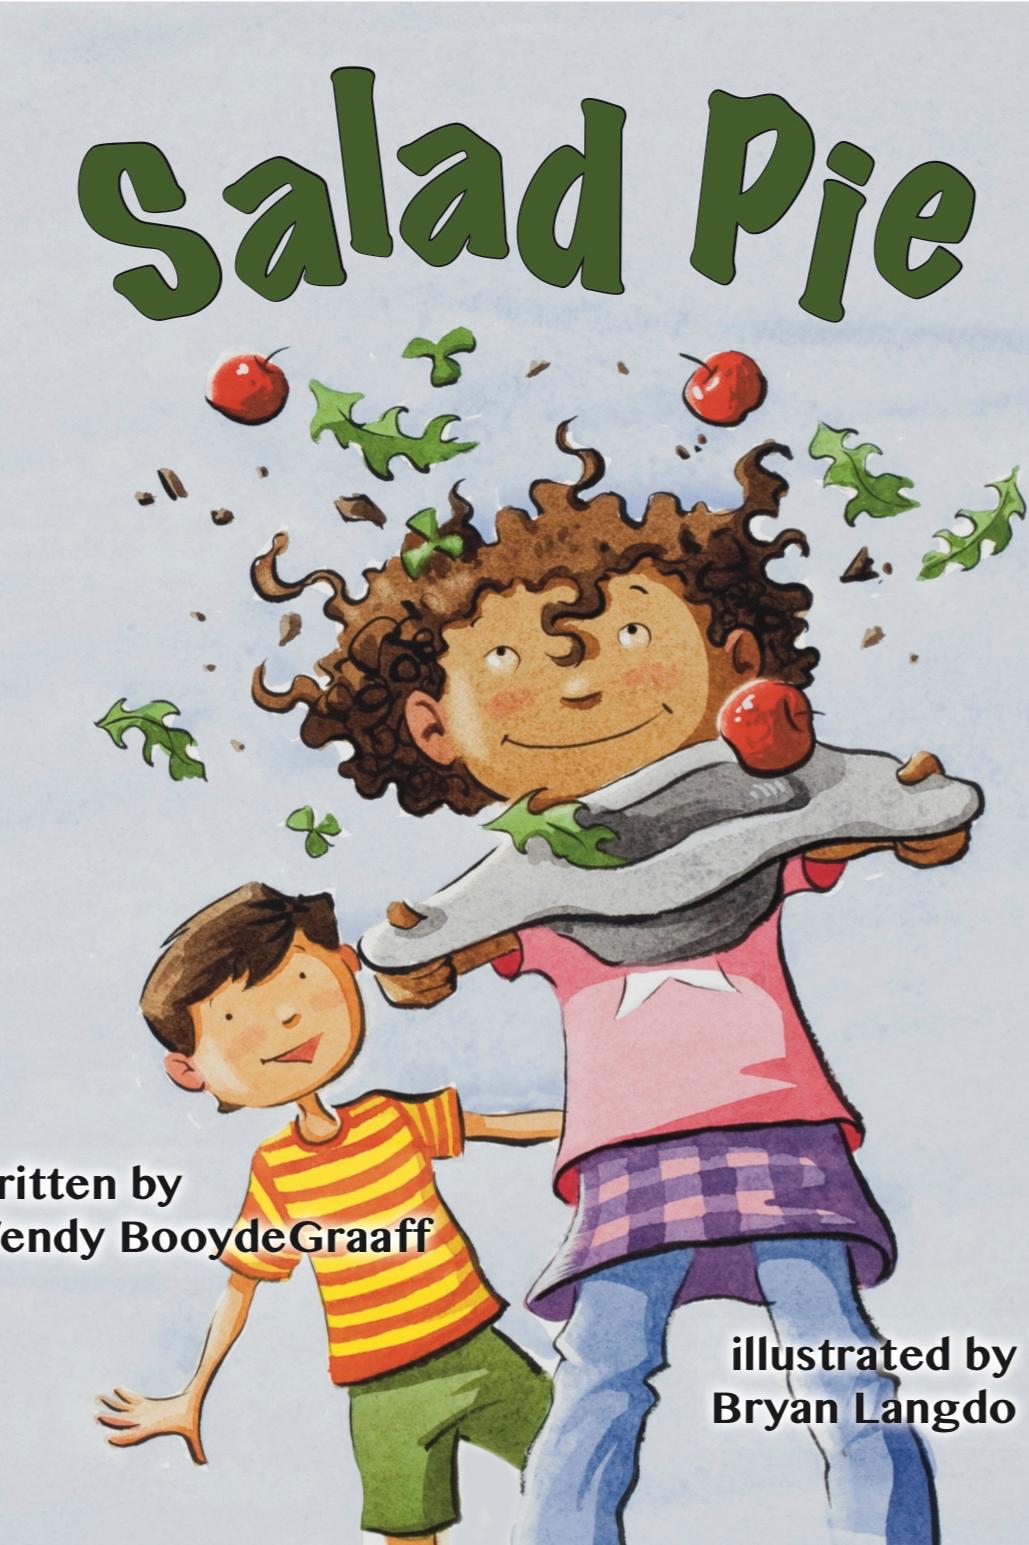 Book cover of Salad Pie by Wendy BooydeGraaff